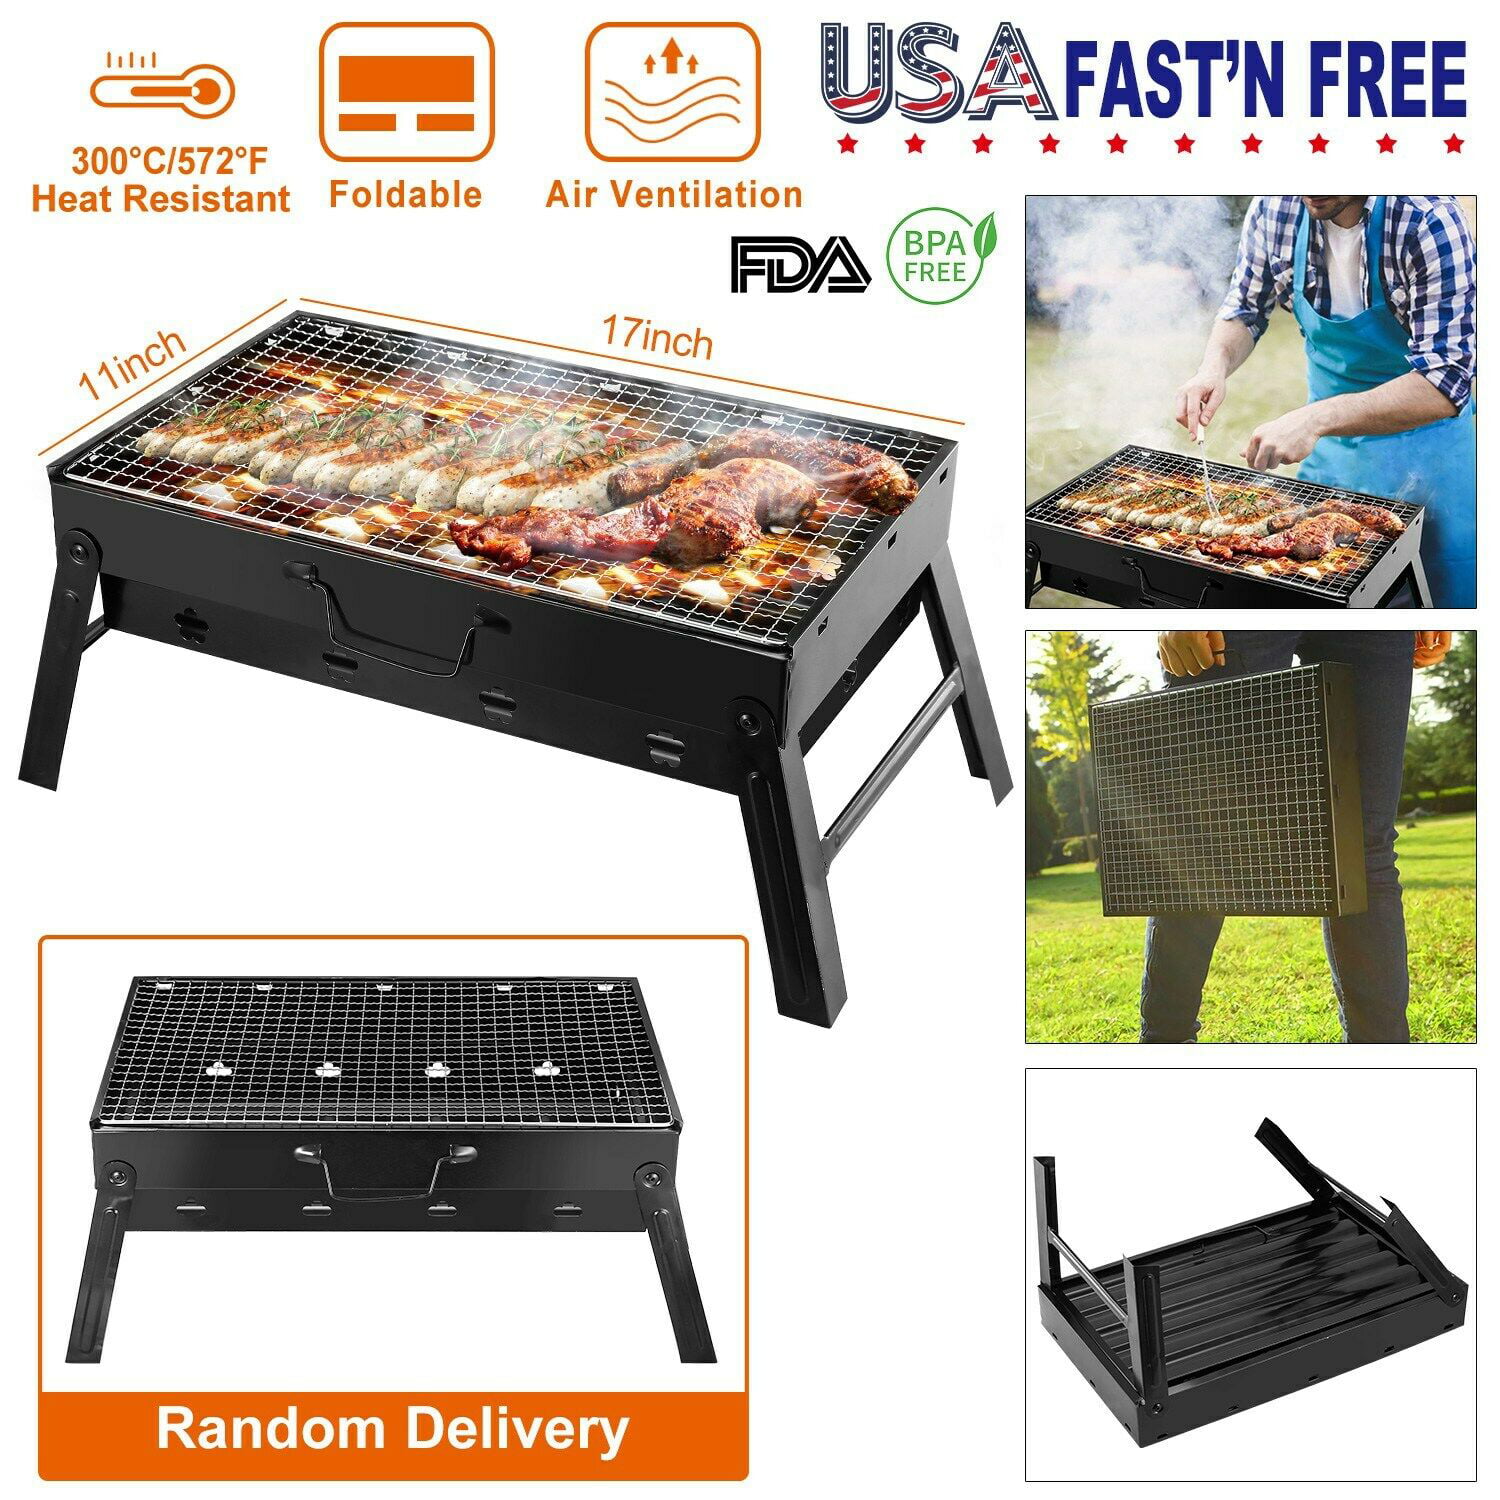 BBQ Barbecue Grill Folding Portable Charcoal Stove Outdoor S/M/XL/THICK VER 